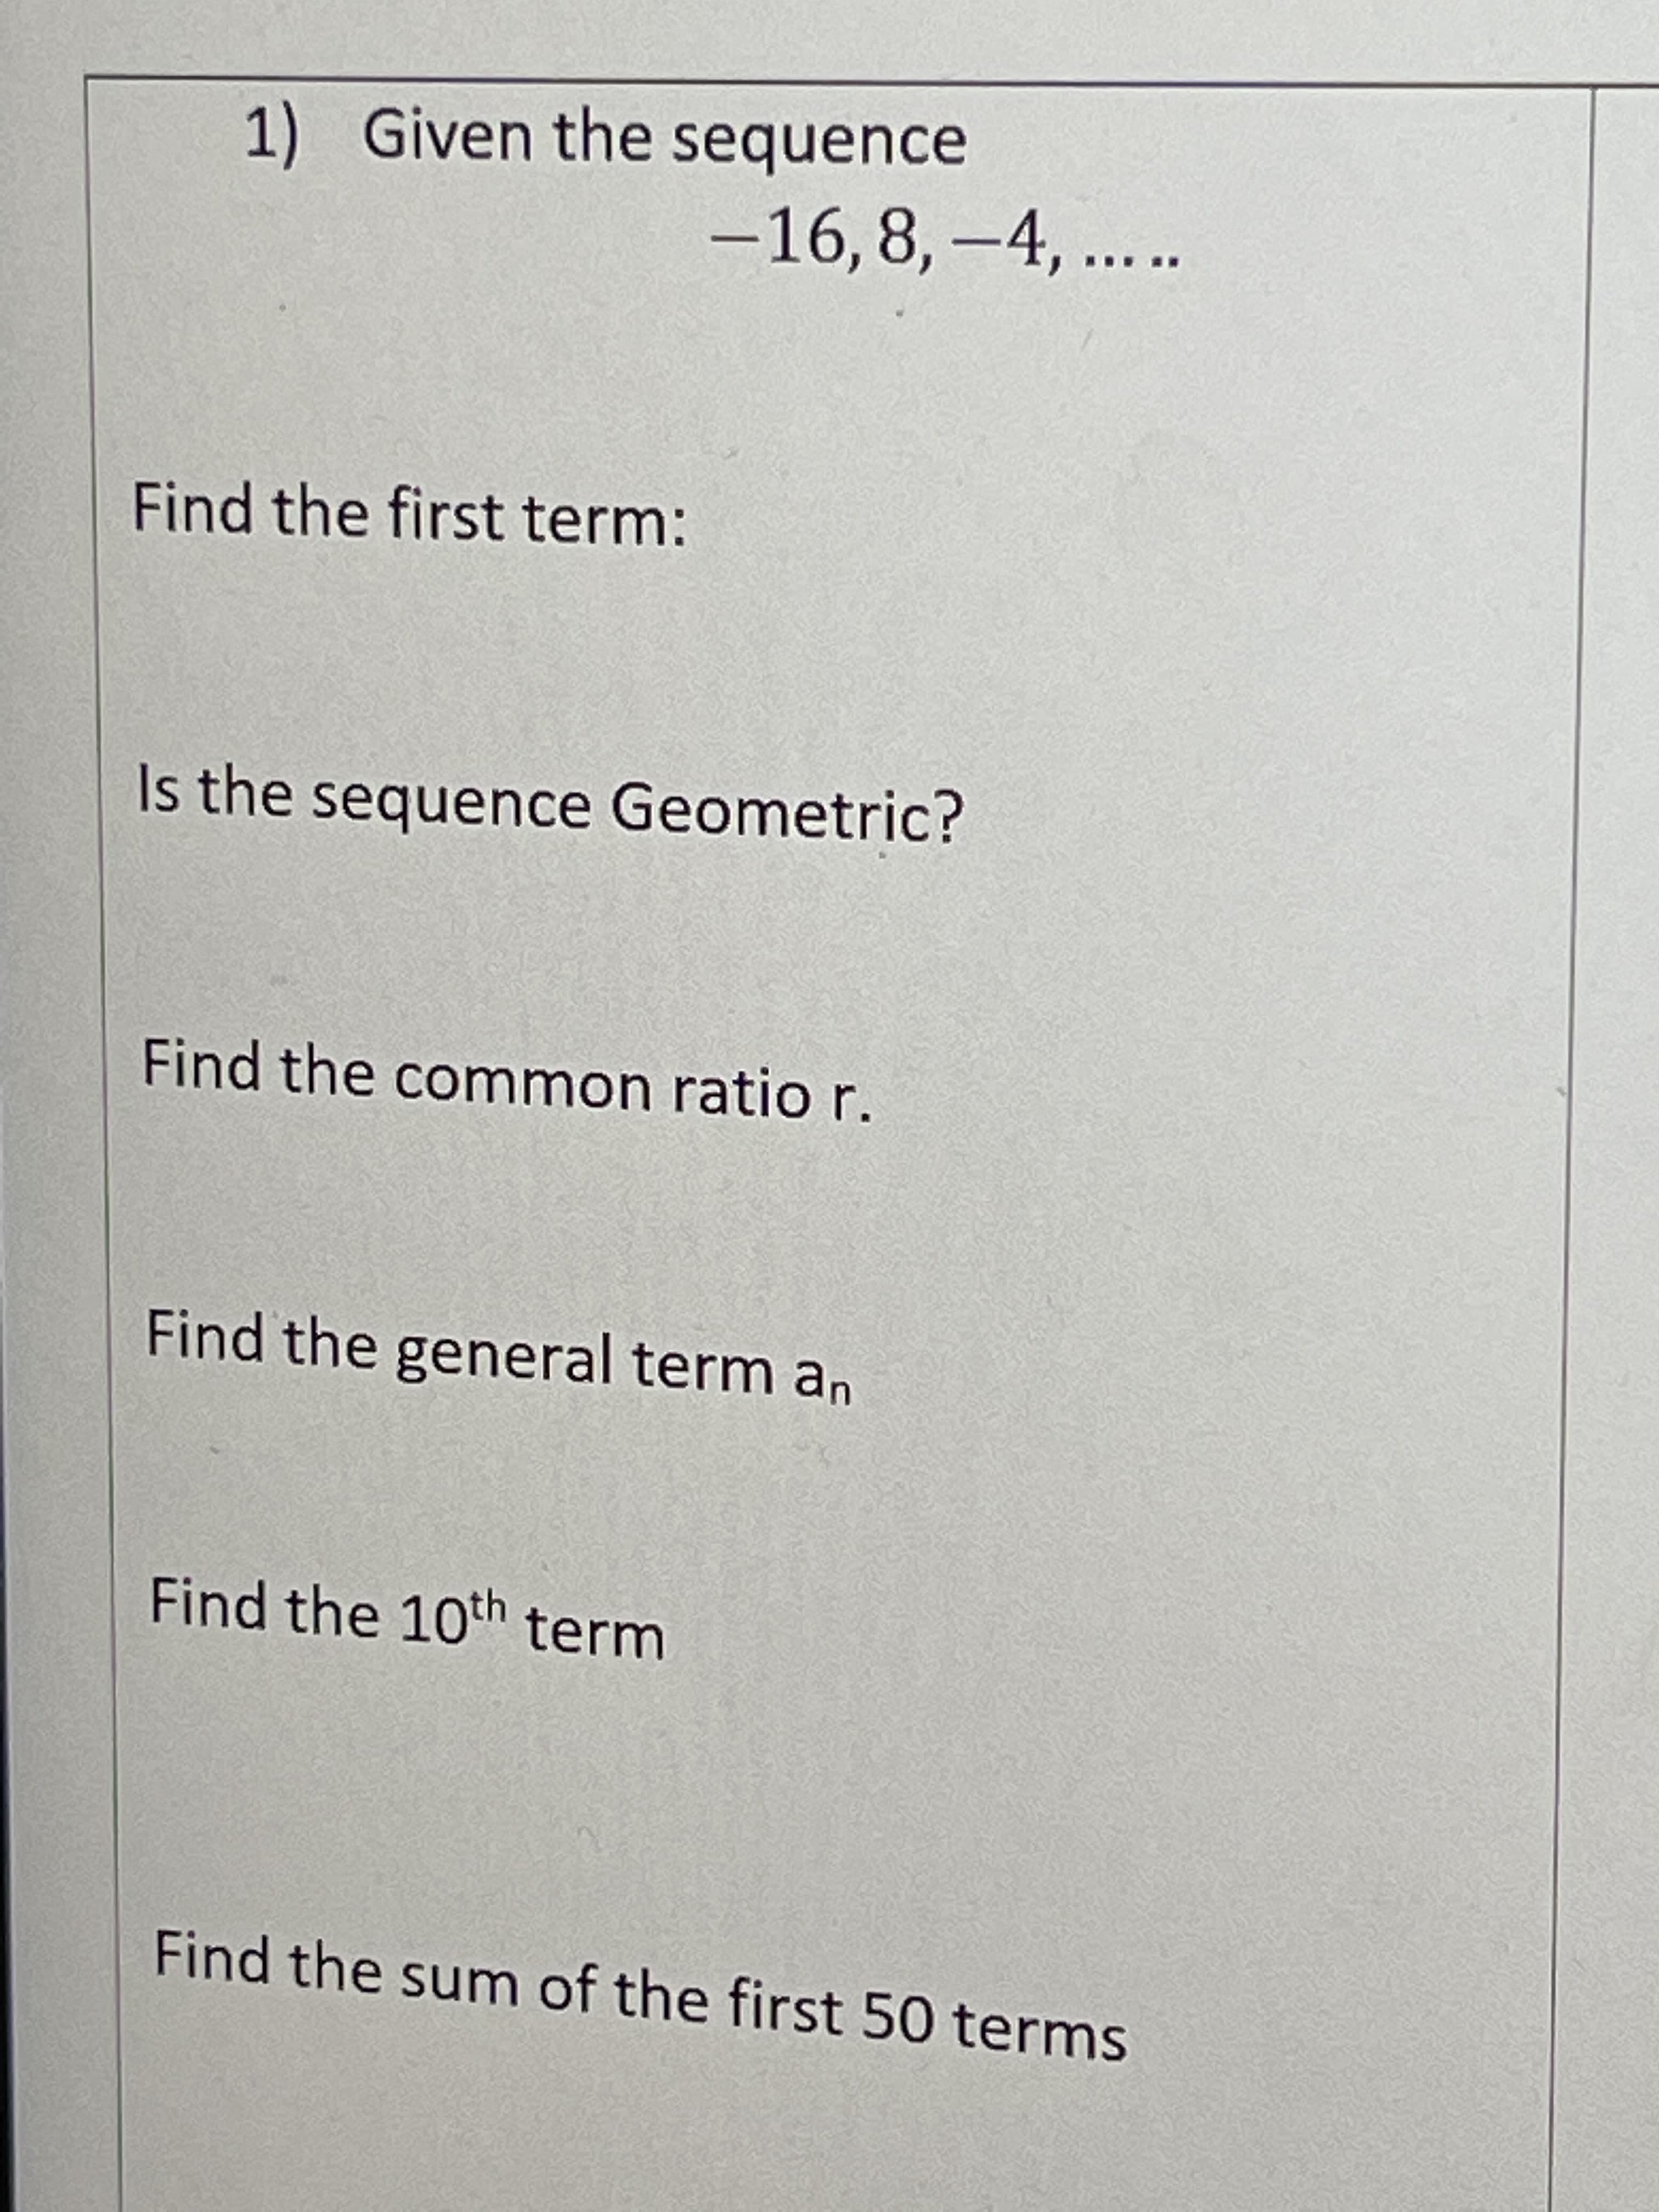 1) Given the sequence
-16,8, -4, ...
Find the first term:
Is the sequence Geometric?
Find the common ratio r.
